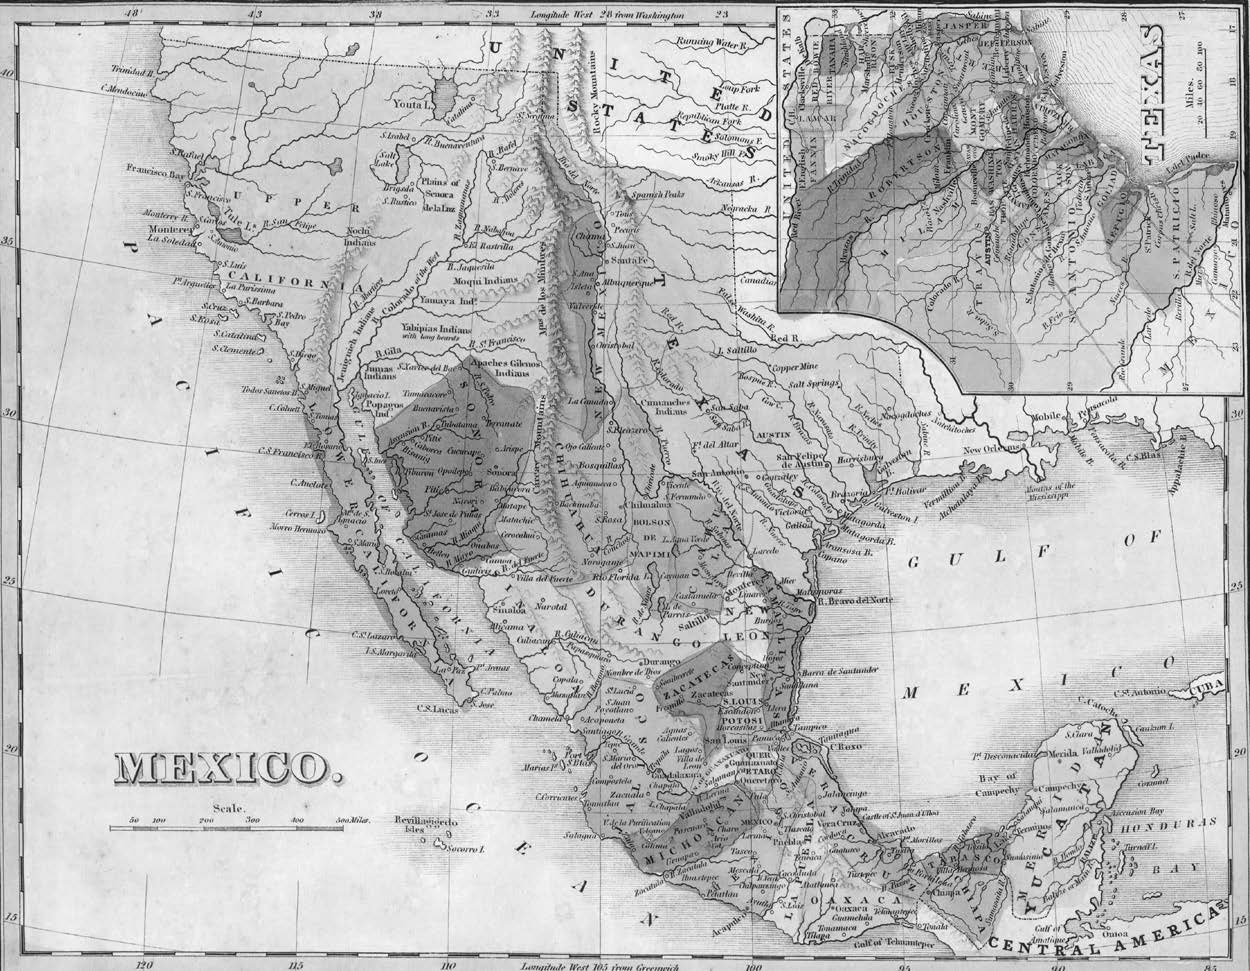 Map of Mexico and Texas, 1844. David Rumsey Map Collection.